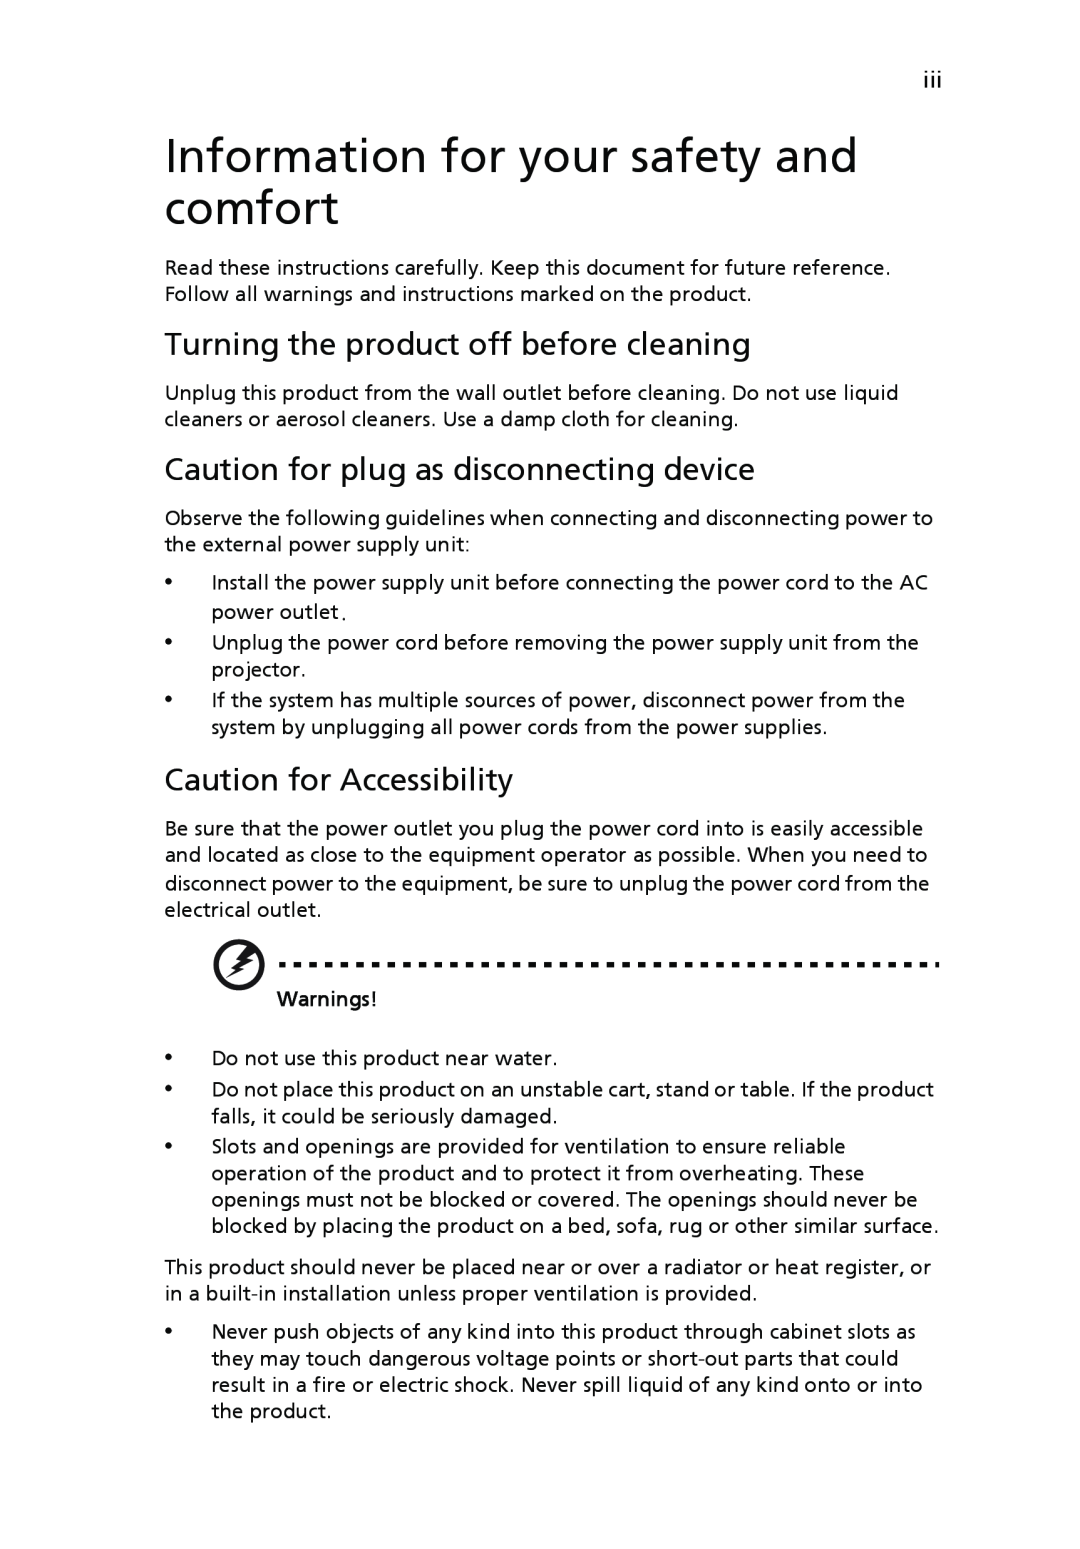 Acer P5270 Information for your safety and comfort, Turning the product off before cleaning, Caution for Accessibility 